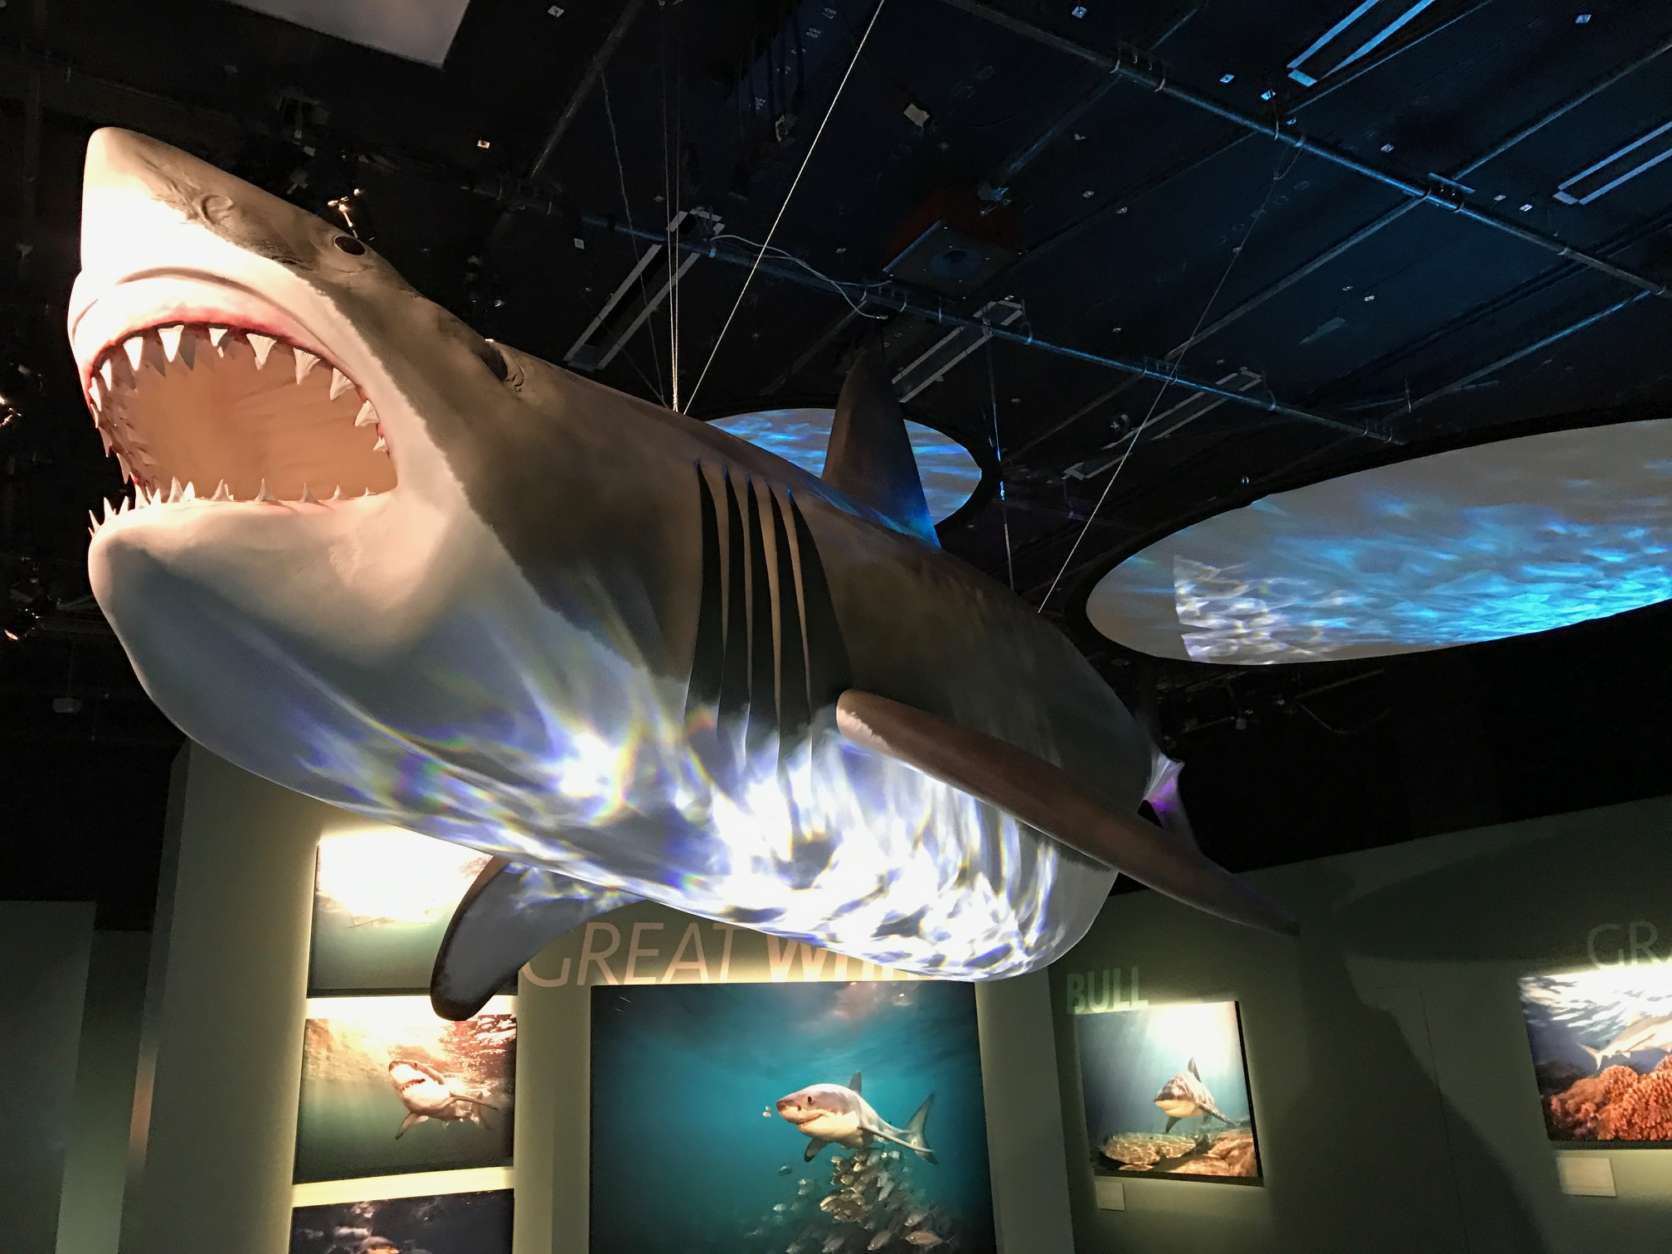 In his exhibit, photographer Brian Skerry wants to change visitors' perceptions of sharks as thoughtless predators, to vulnerable animals essential to the eco-system. (WTOP/Megan Cloherty)